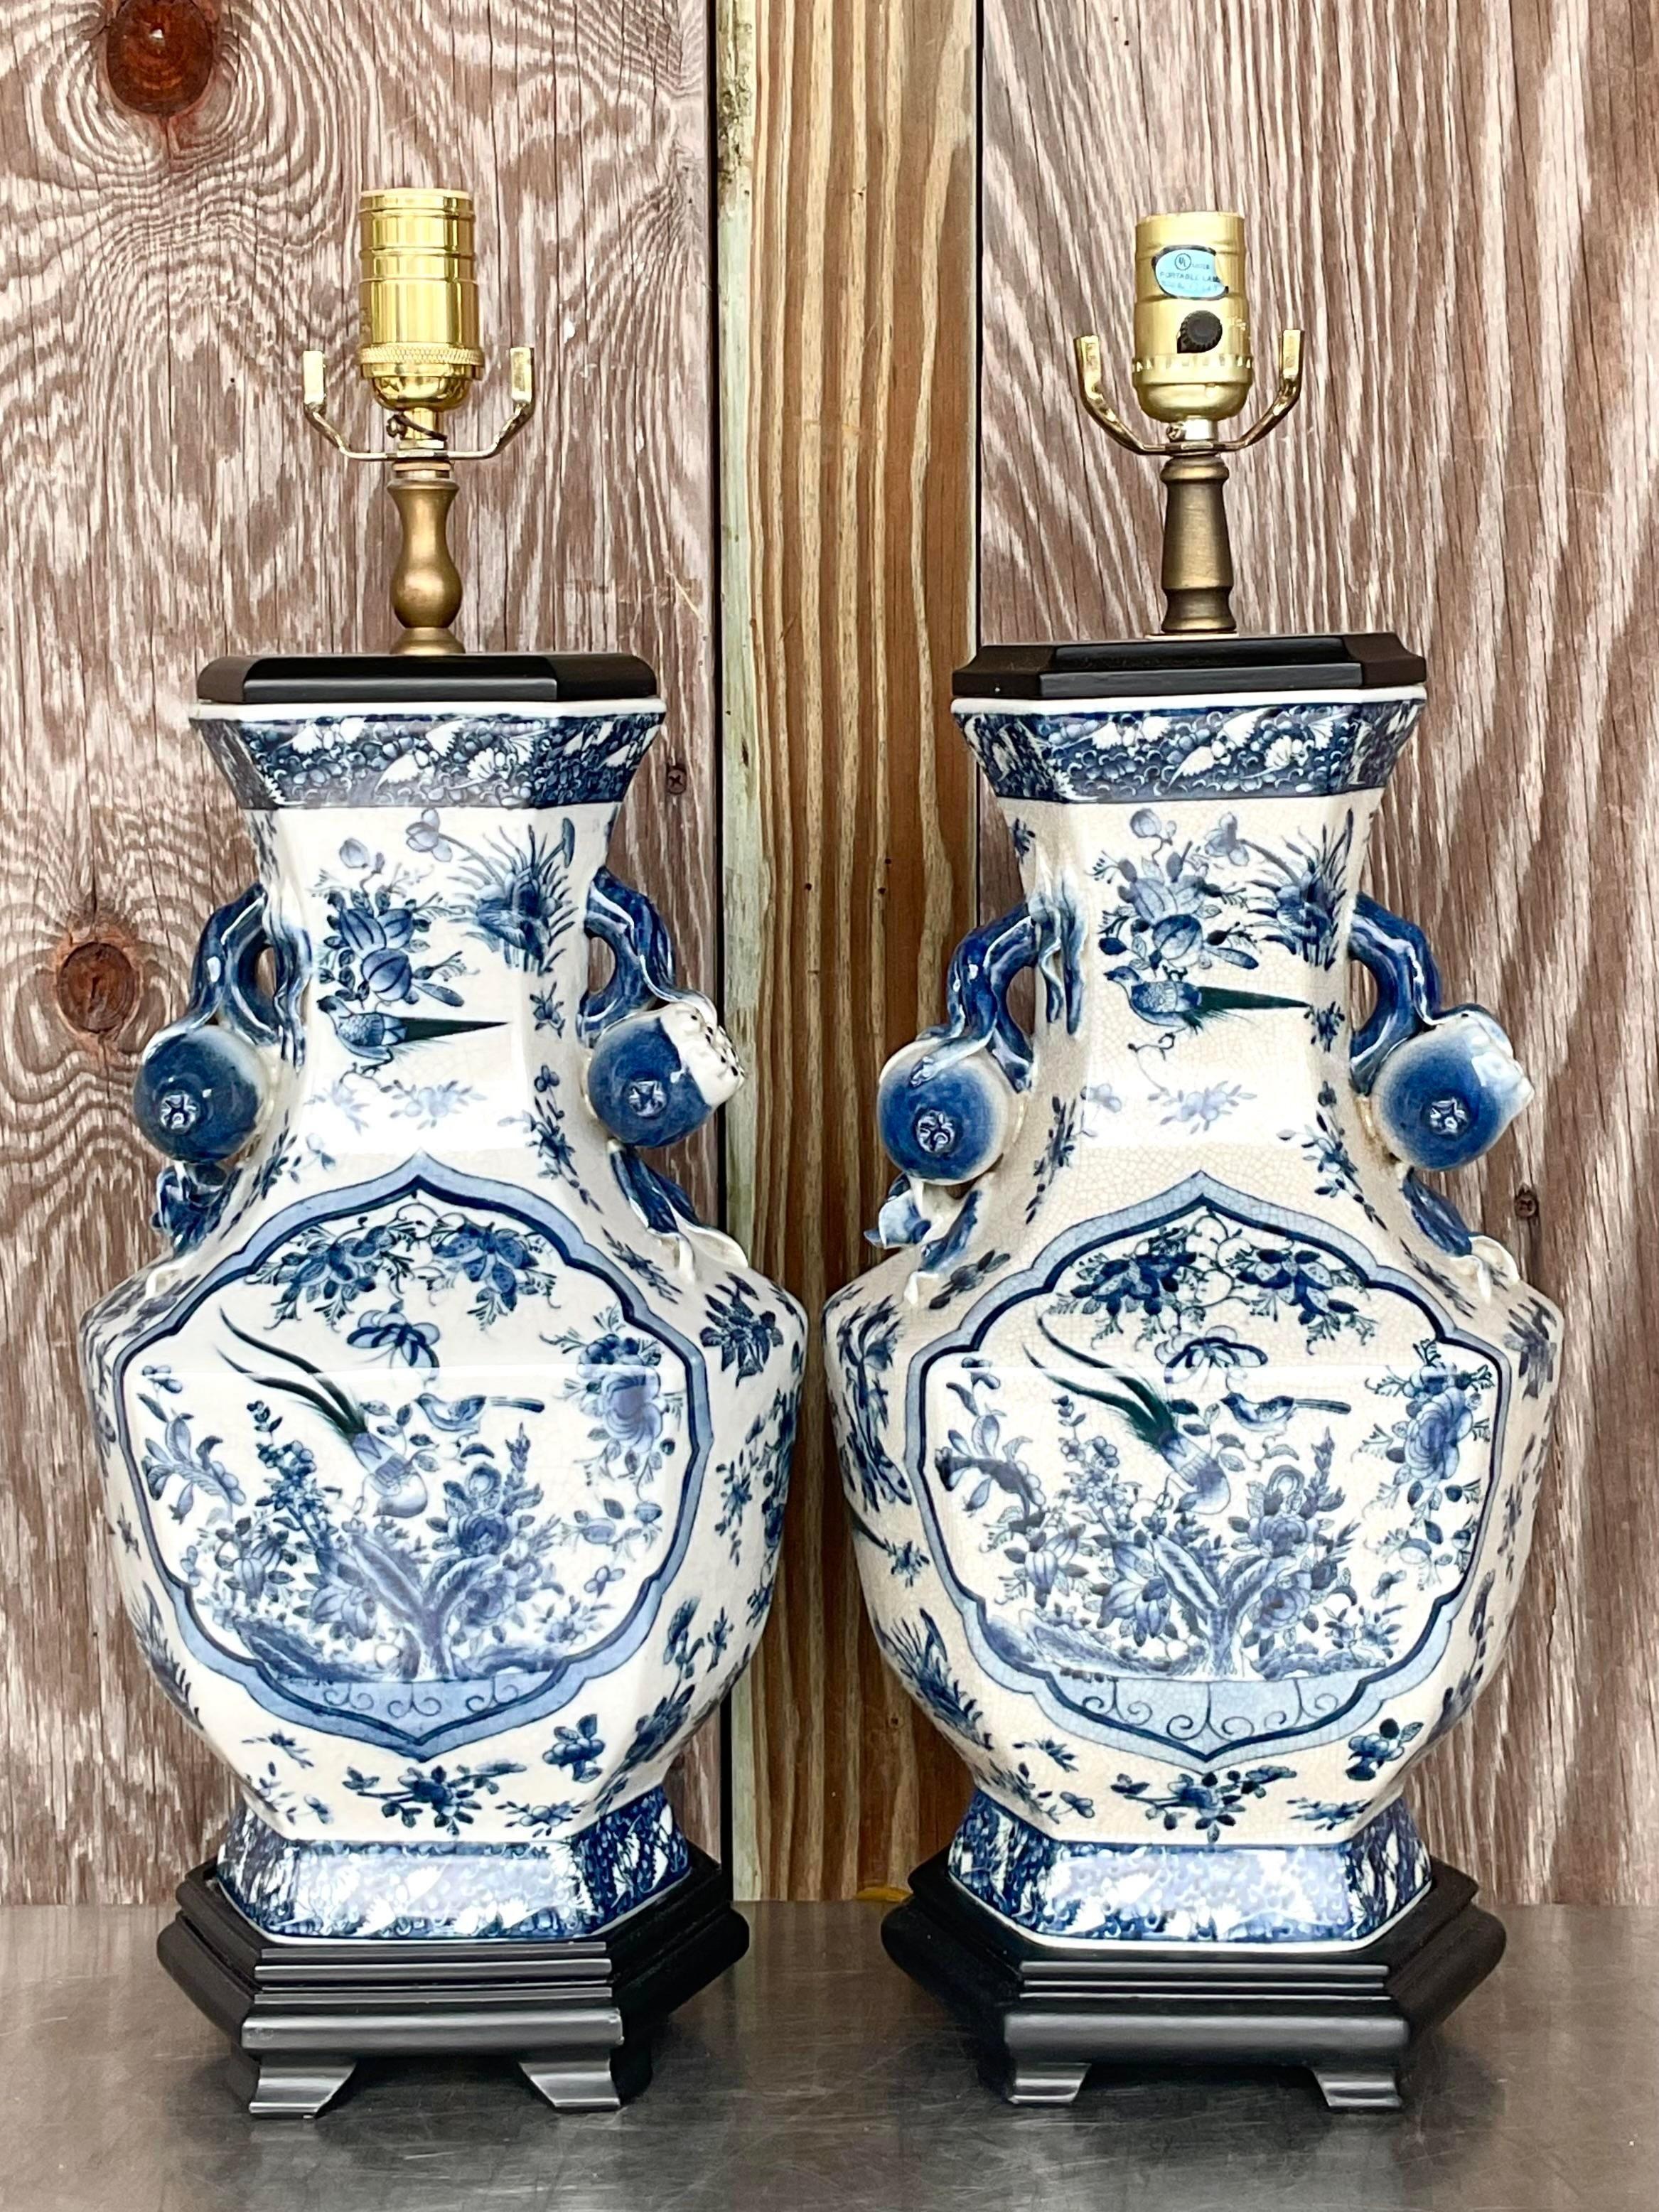 20th Century Vintage Asian Chinoiserie Ceramic Lamps - a Pair For Sale